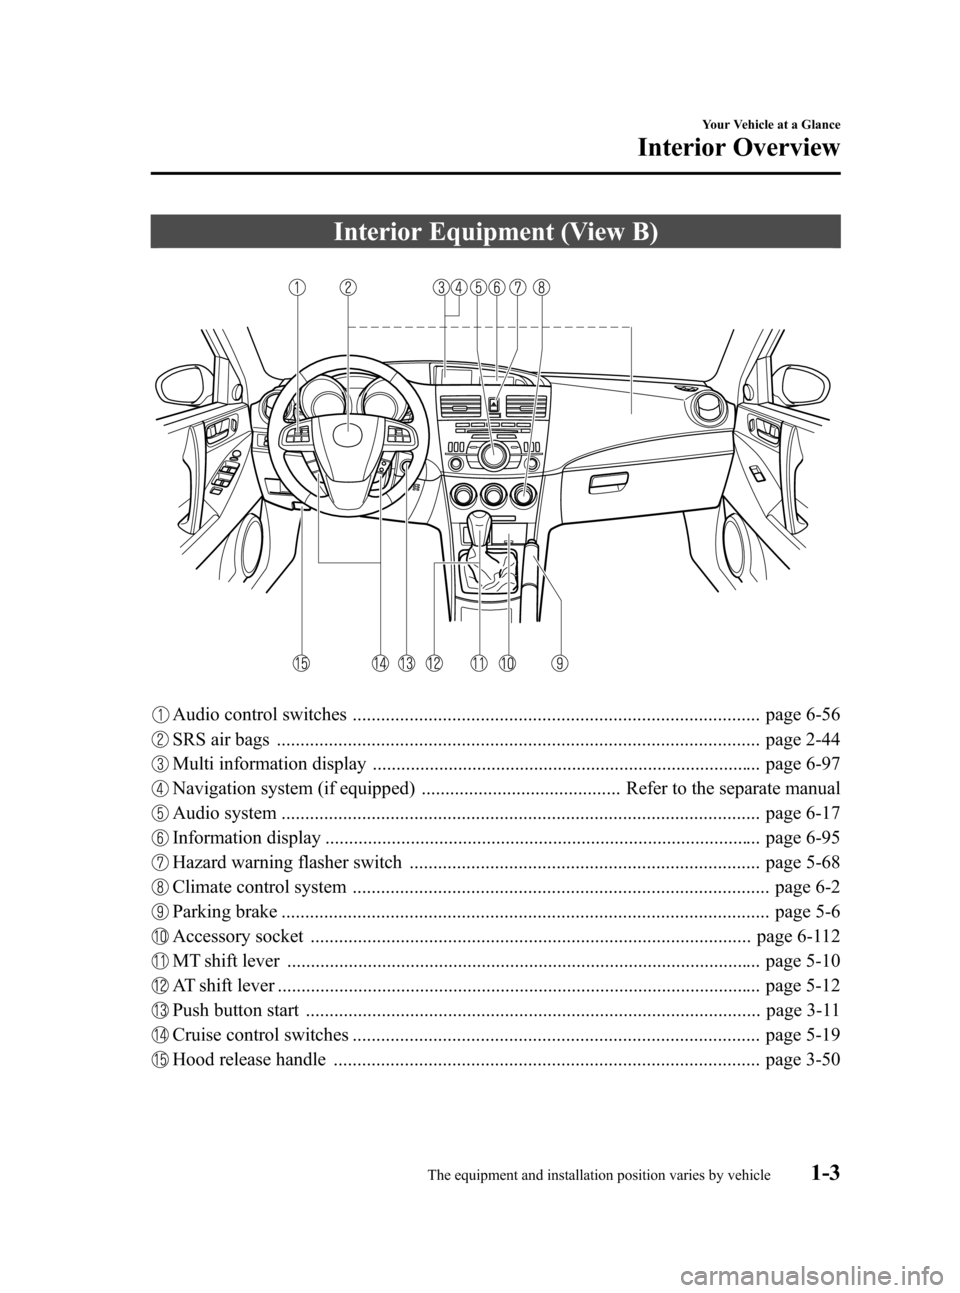 MAZDA MODEL 3 HATCHBACK 2010  Owners Manual (in English) Black plate (9,1)
Interior Equipment (View B)
Audio control switches ...................................................................................... page 6-56
SRS air bags .....................